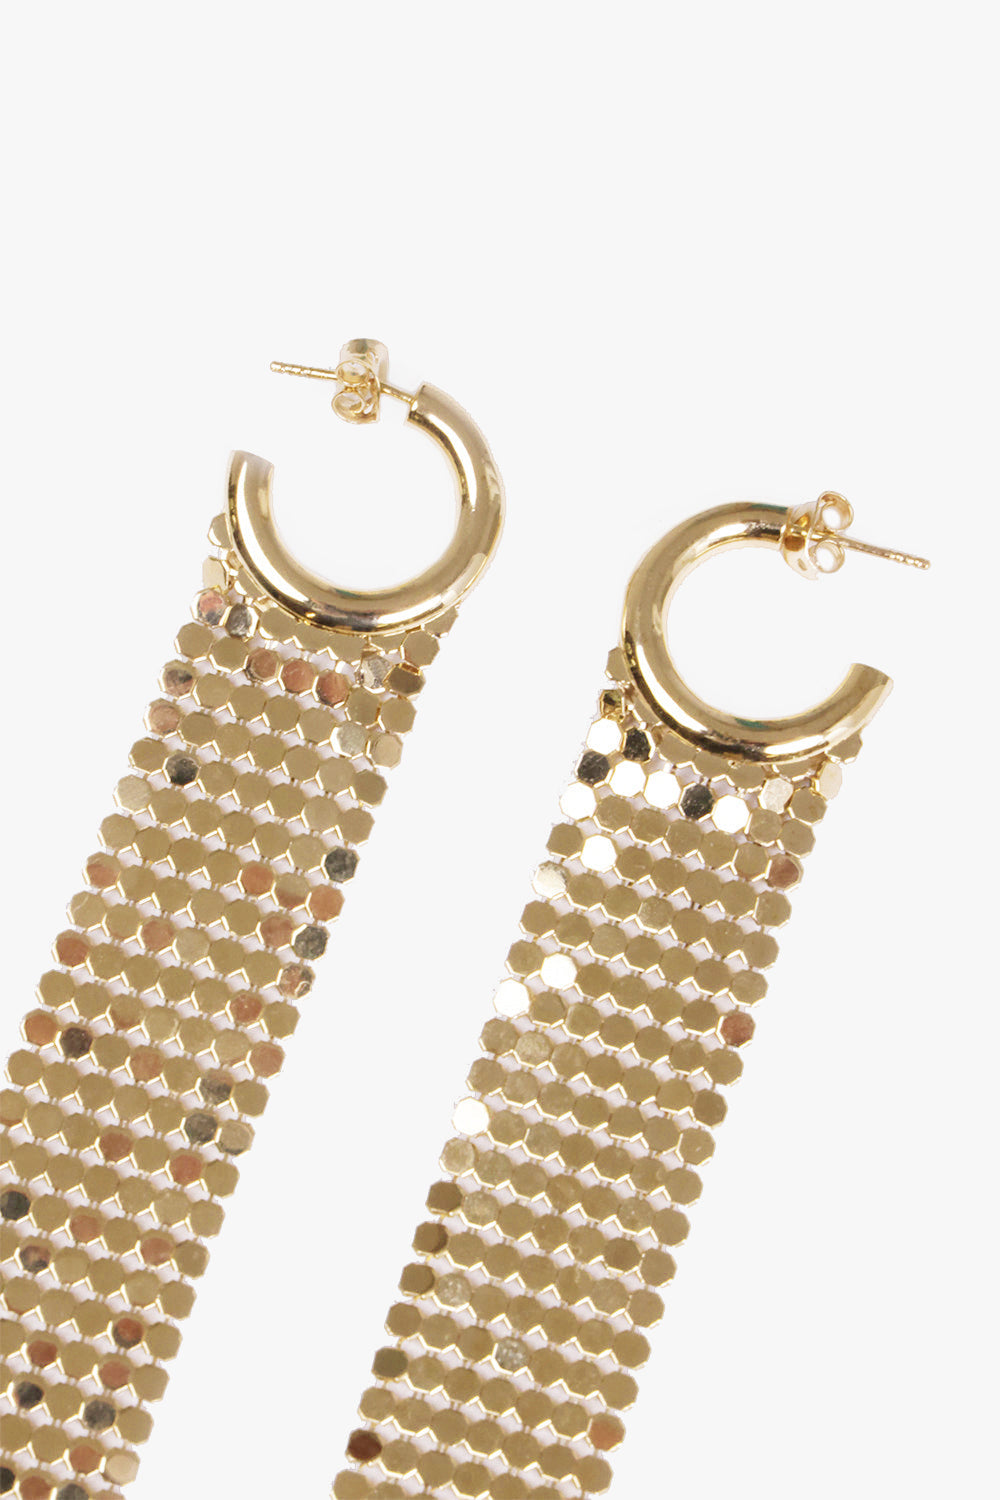 PACO RABANNE JEWELLERY GOLD PIXEL CHAINMAIL HOOP EARRING | GOLD